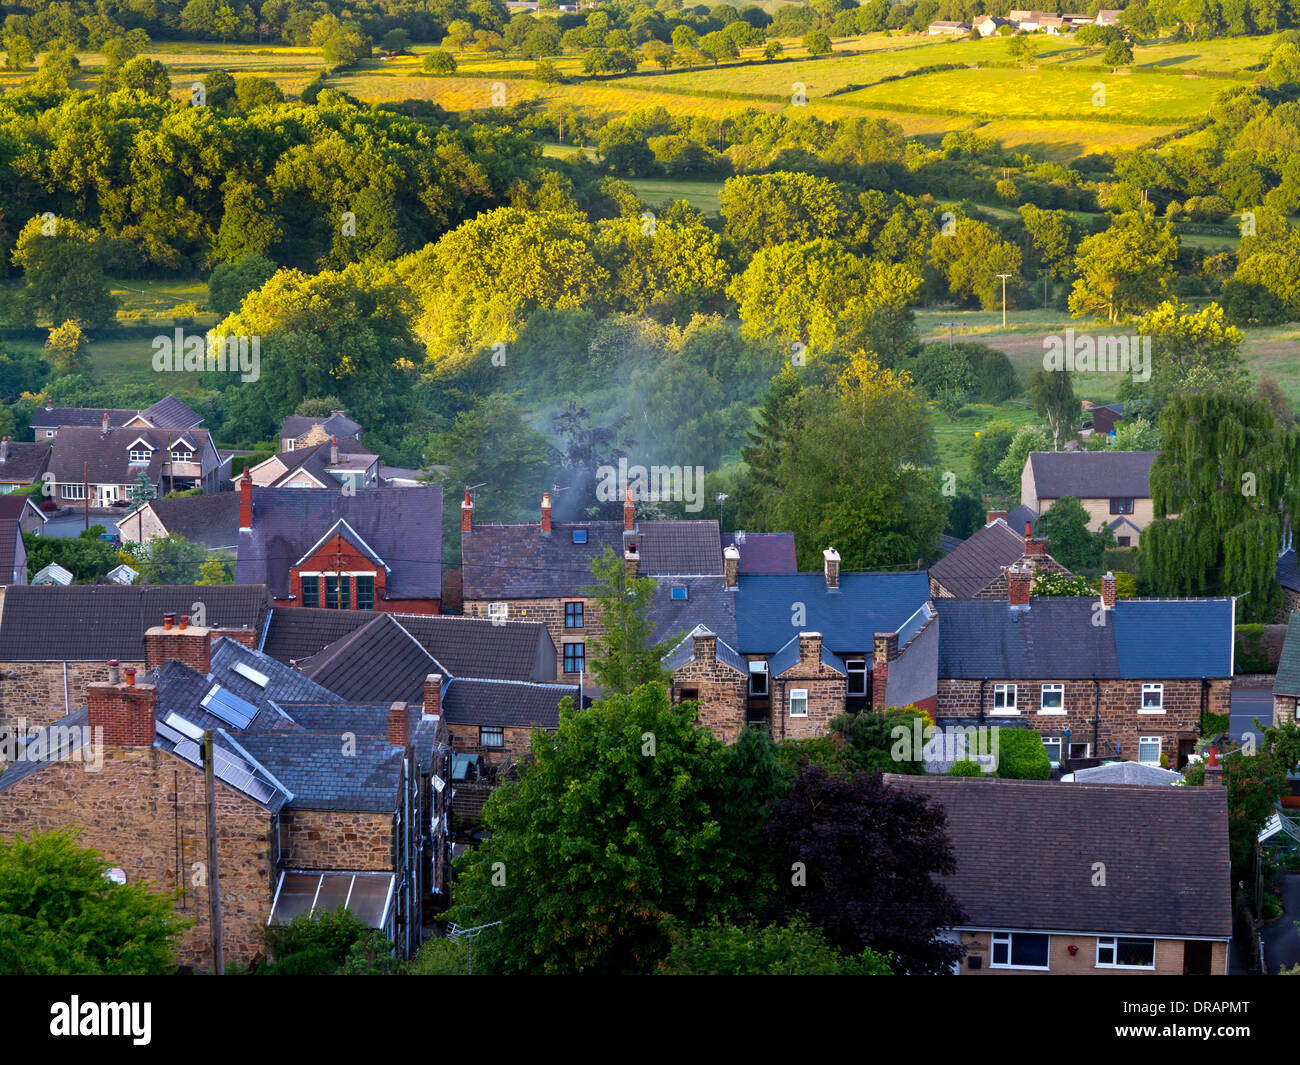 Rural housing with green belt countryside next to village houses in Crich Amber Valley Derbyshire Peak District England UK Stock Photo